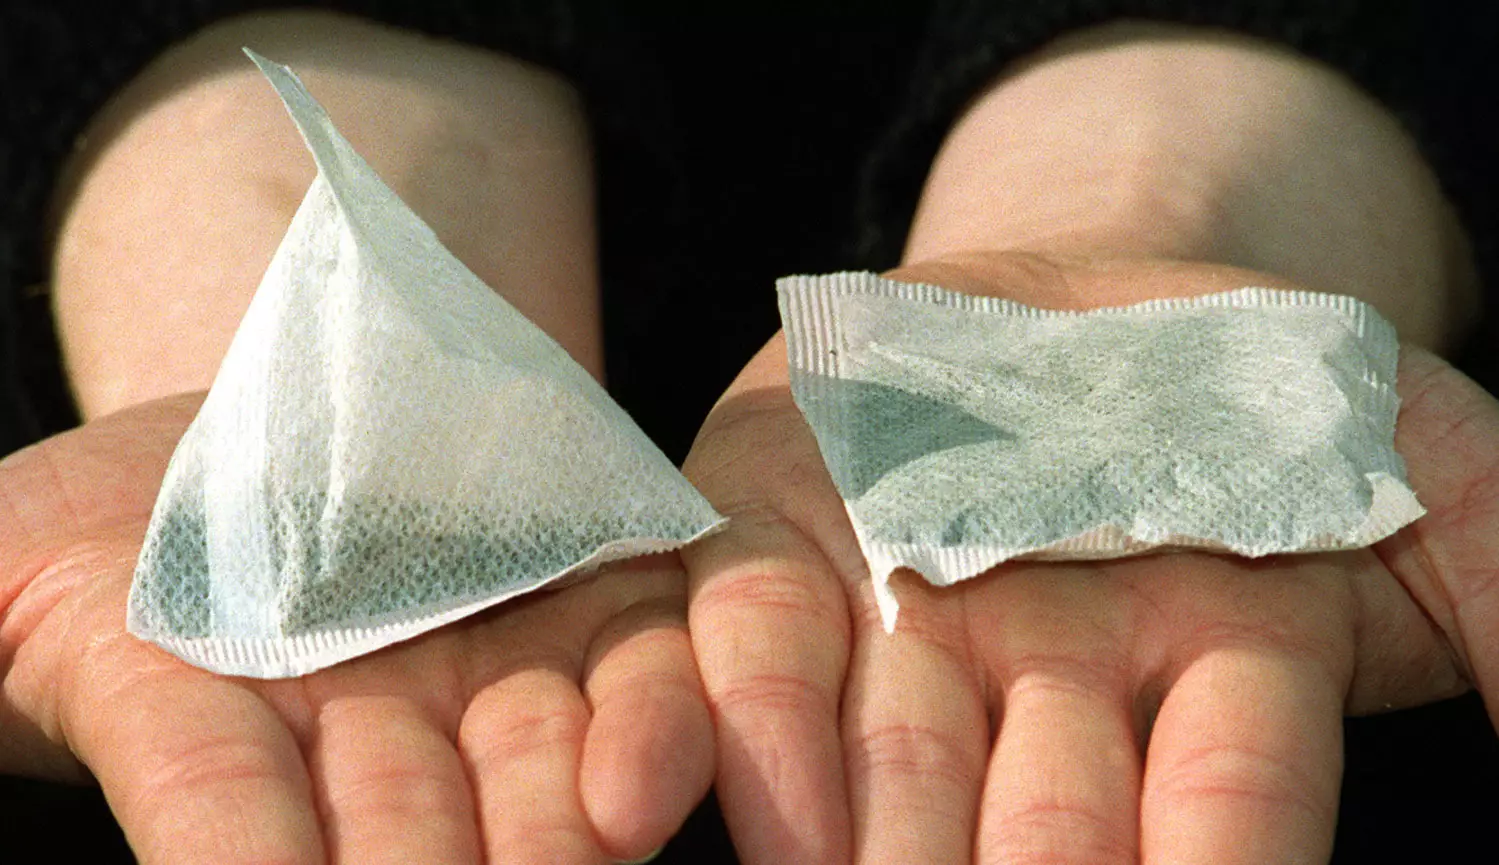 A study has indicated that Brits steal around £3 million worth of tea bags each year.